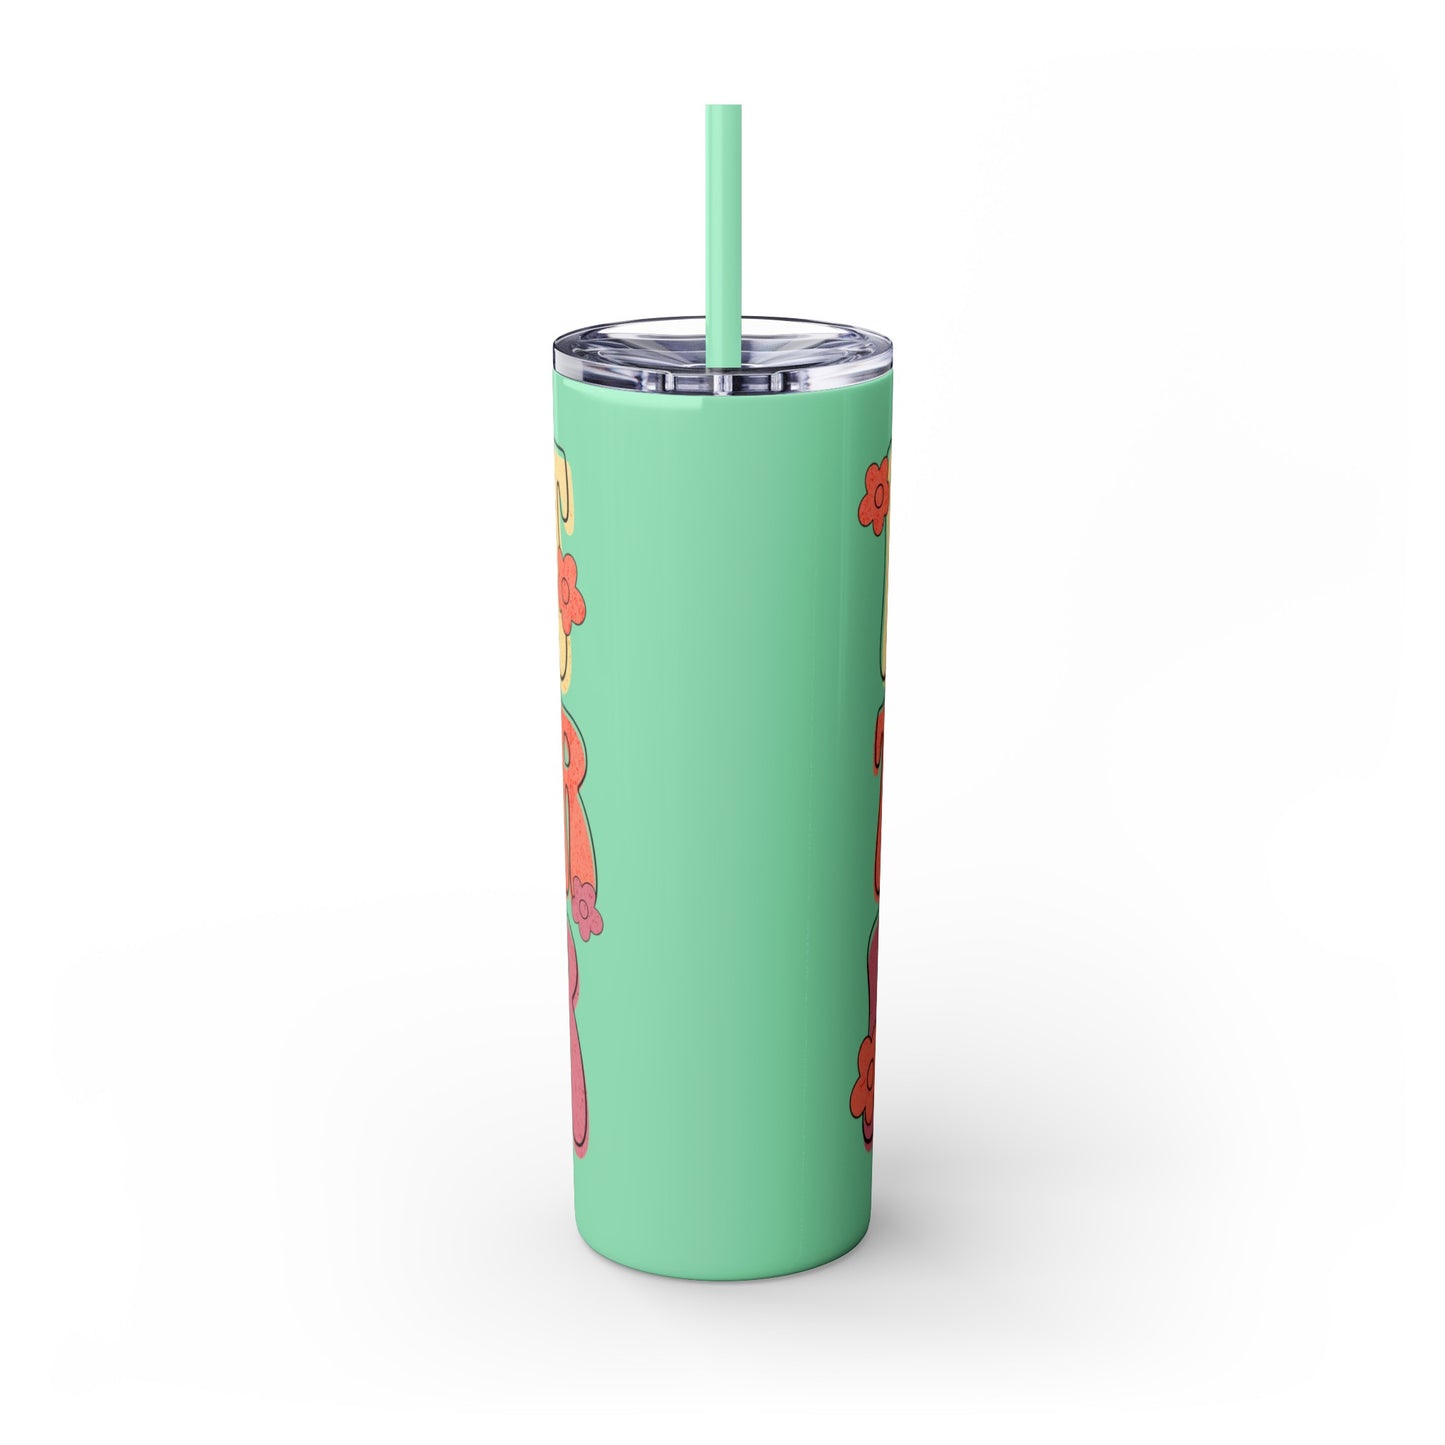 Best Tutor Ever Tumbler with Straw, 20oz